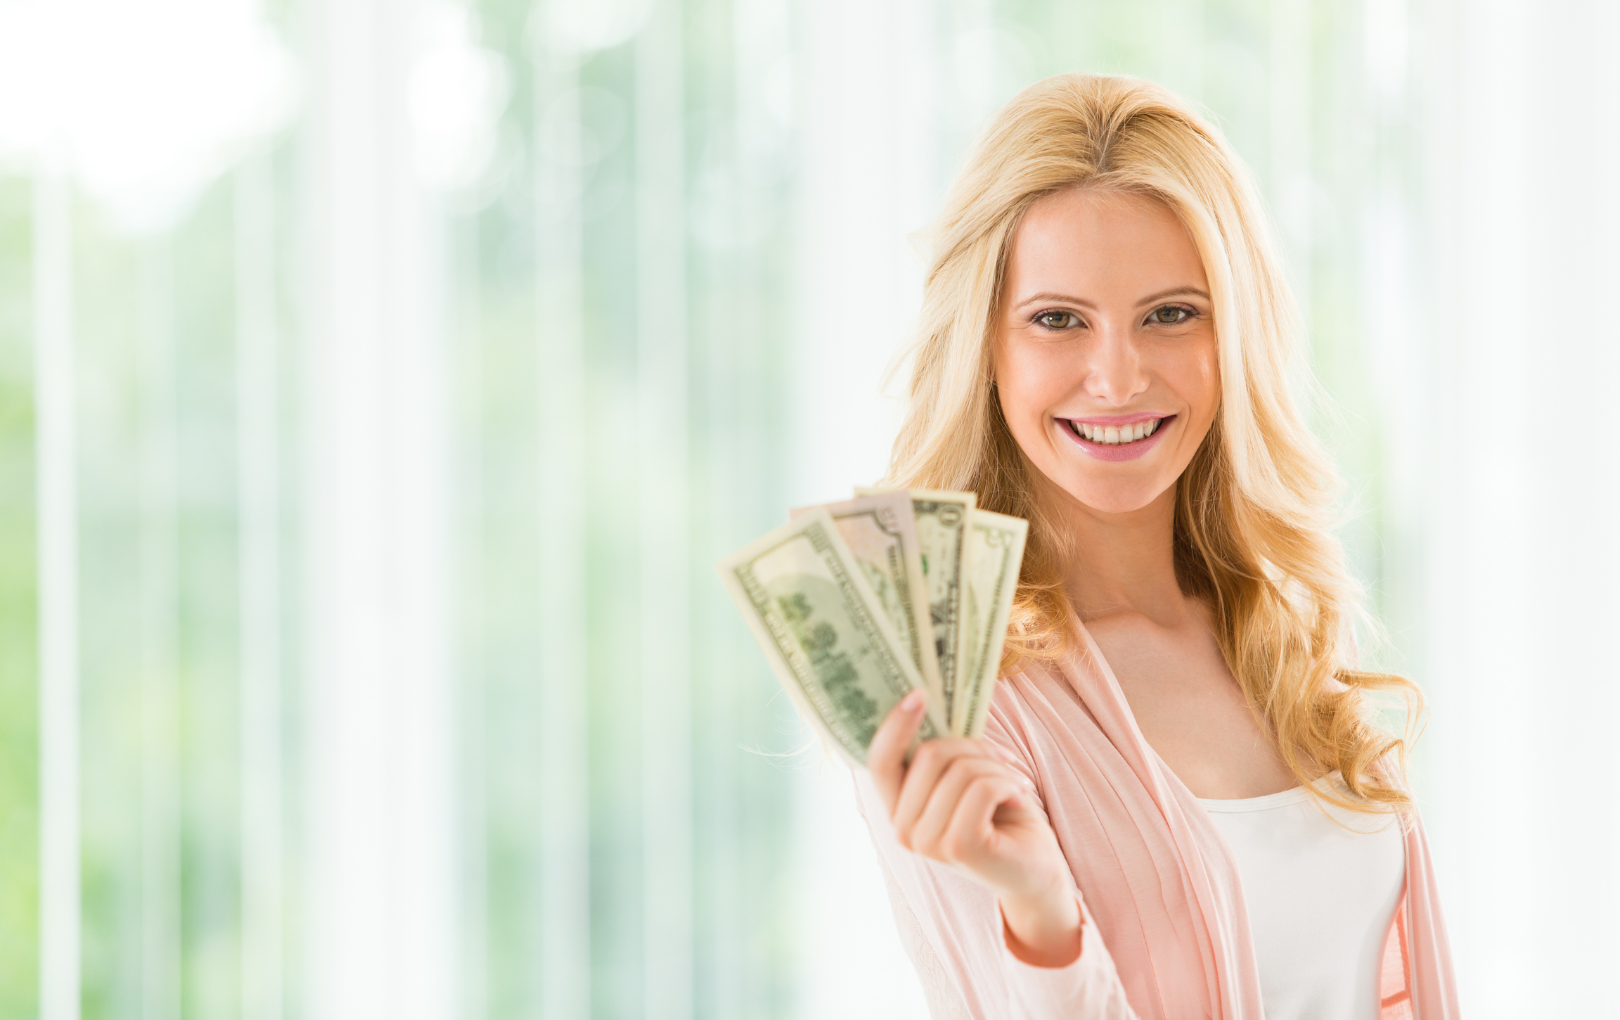 Smiling Woman Holding Out A "Fan" Of Money in Her Hand. Women: Overcome Financial Challenges